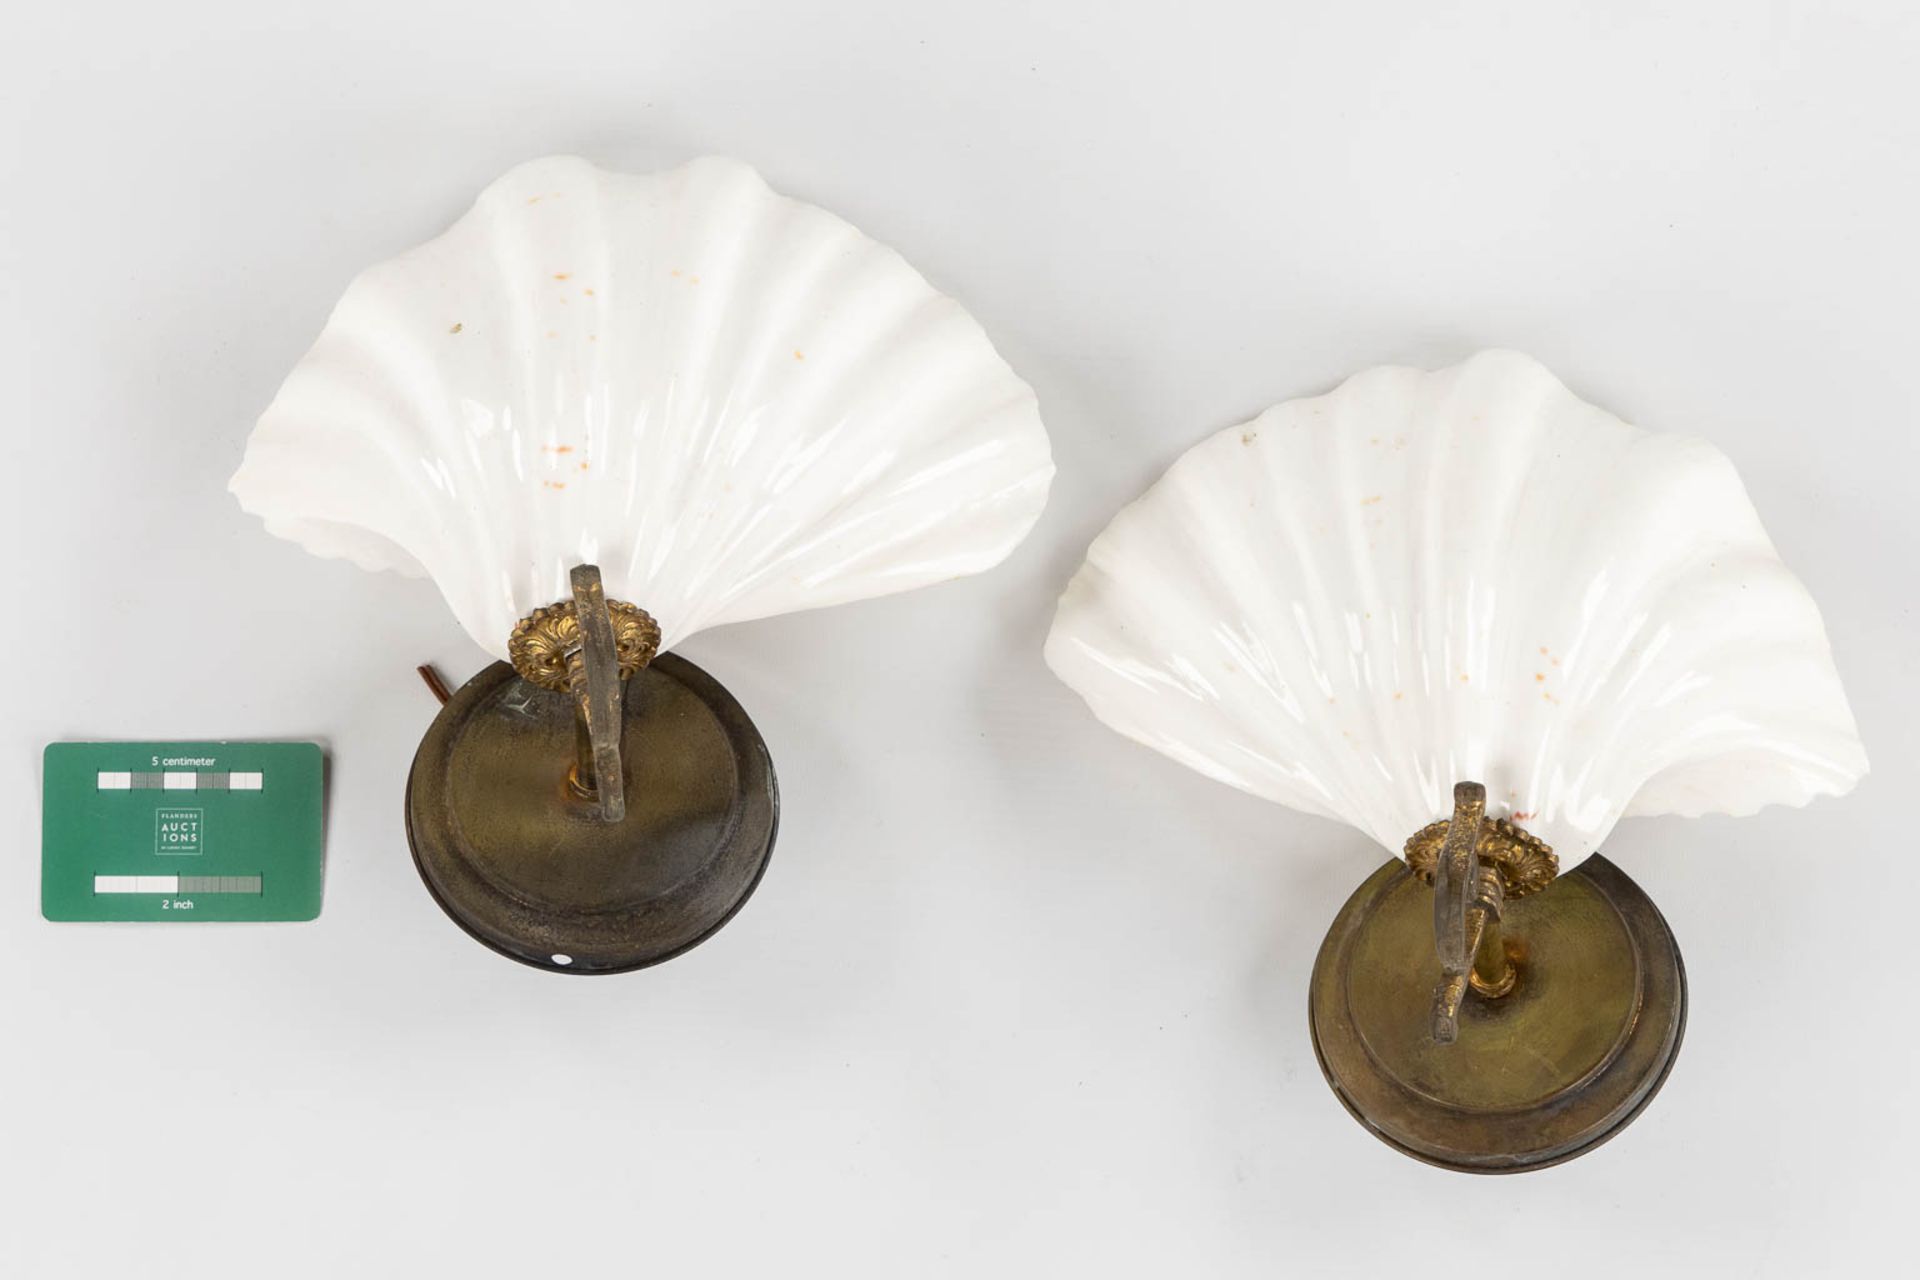 A decorative pair of walllamps, mounted on copper. Circa 1950. (L:13 x W:26 x H:25 cm) - Image 2 of 5